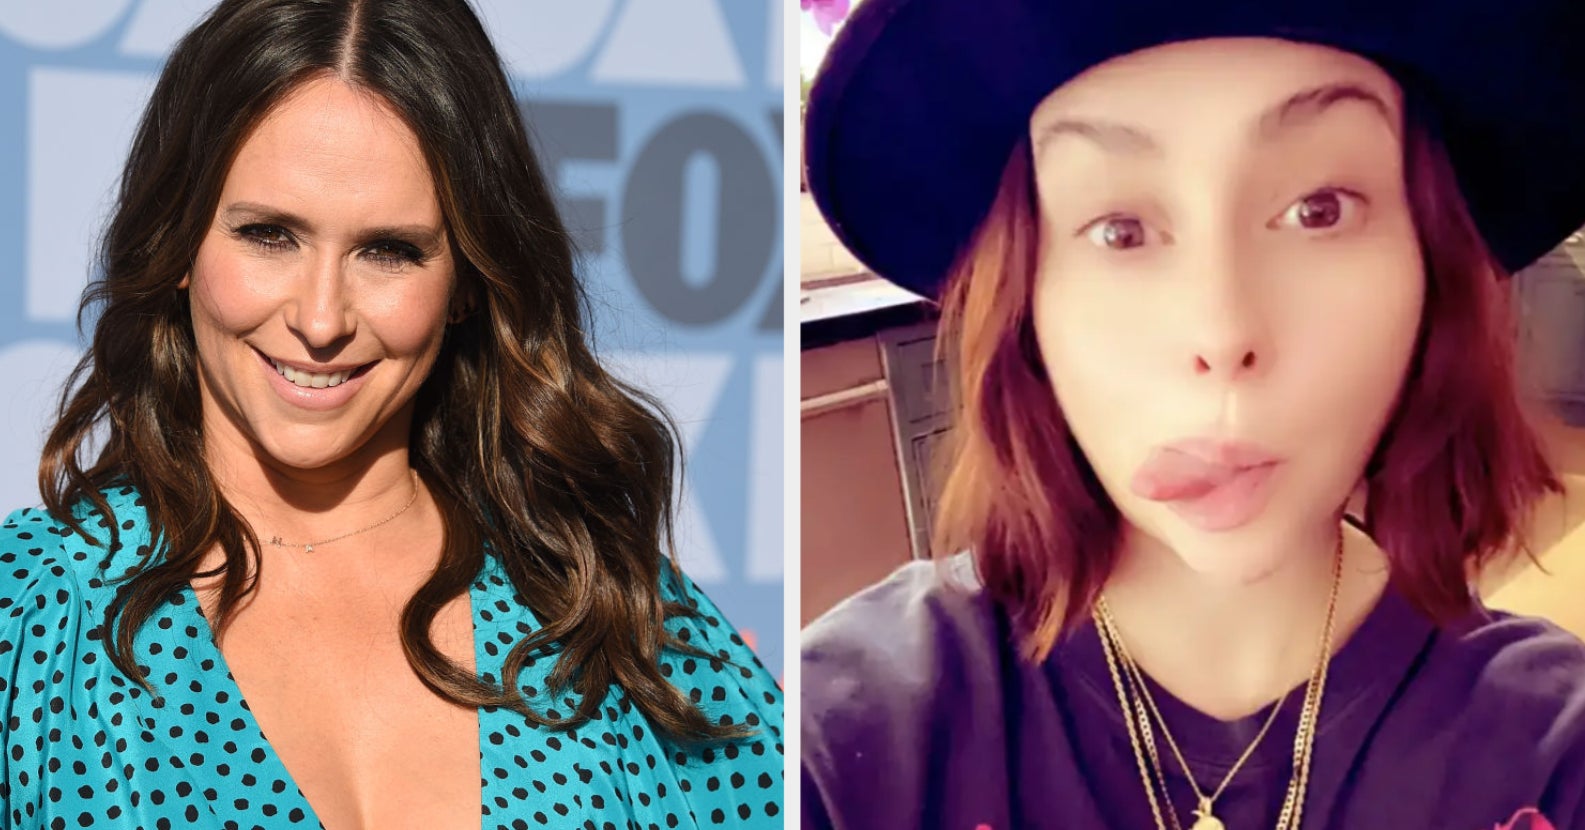 Jennifer Love Hewitt Addressed People Online Attacking Her For Using